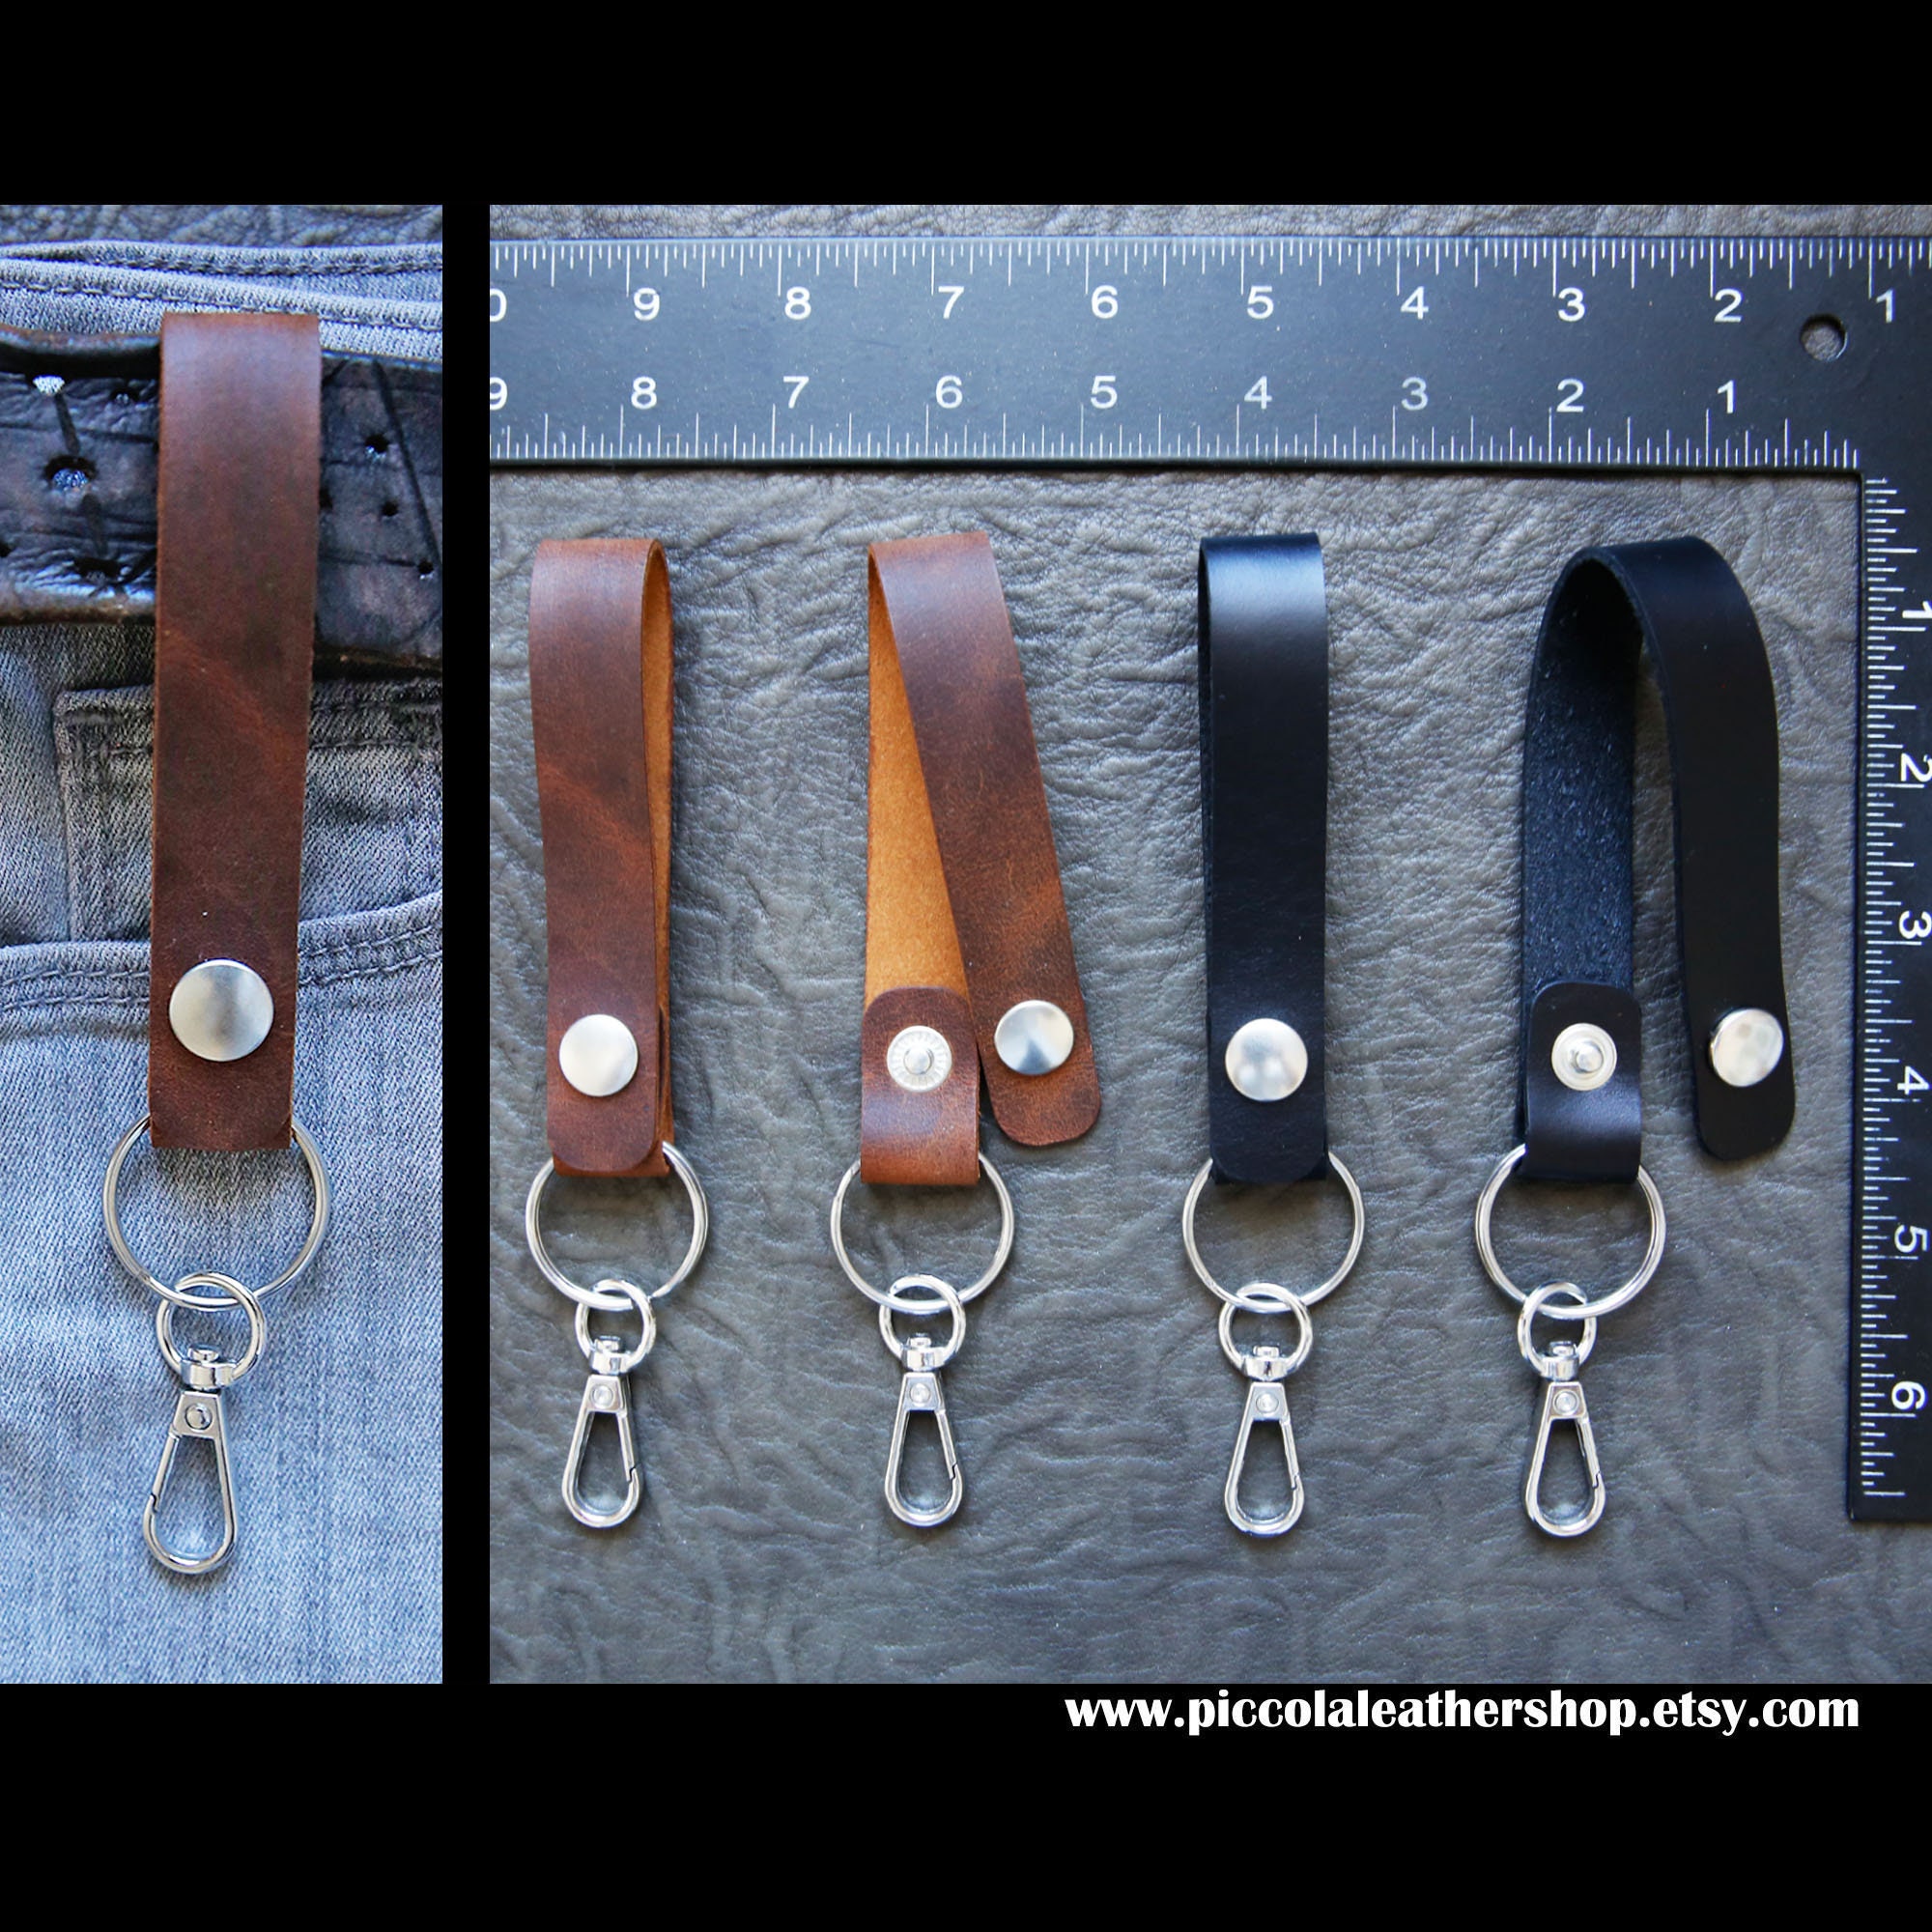 How To: Make These DIY Leather Keychain Fobs